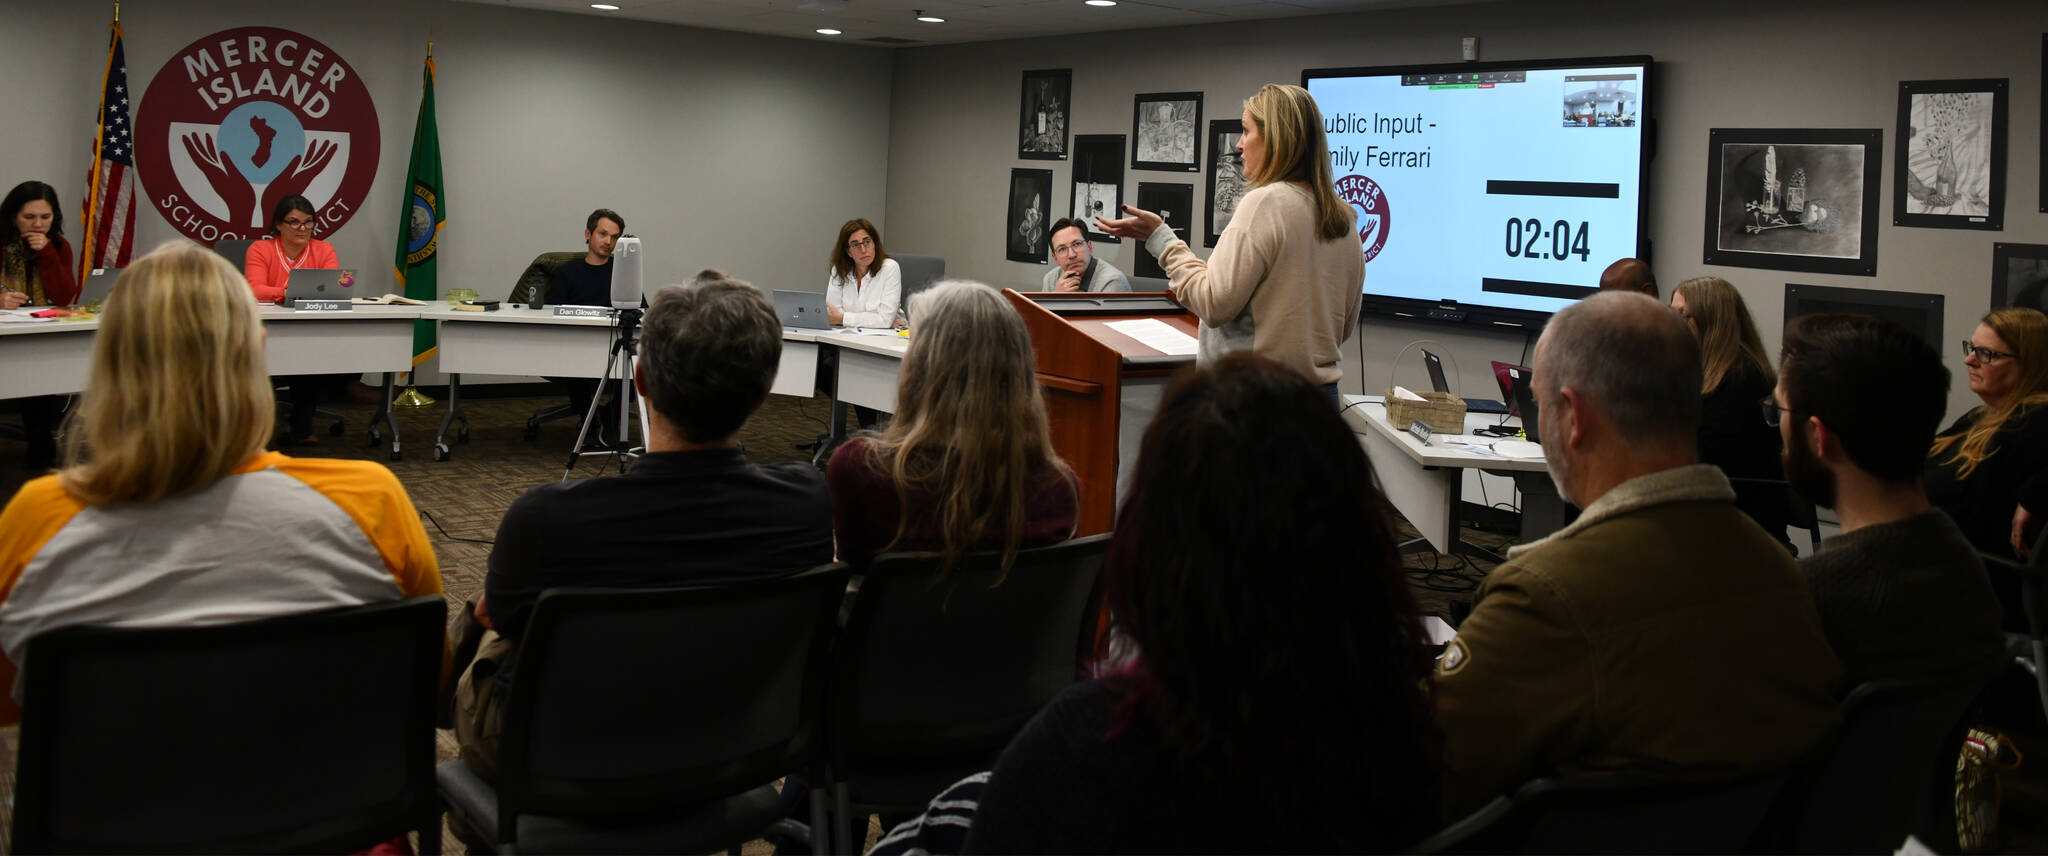 Mercer Island resident Emily Ferrari speaks in favor of open enrollment at the Mercer Island School District board of directors meeting on March 28. Andy Nystrom/staff photo